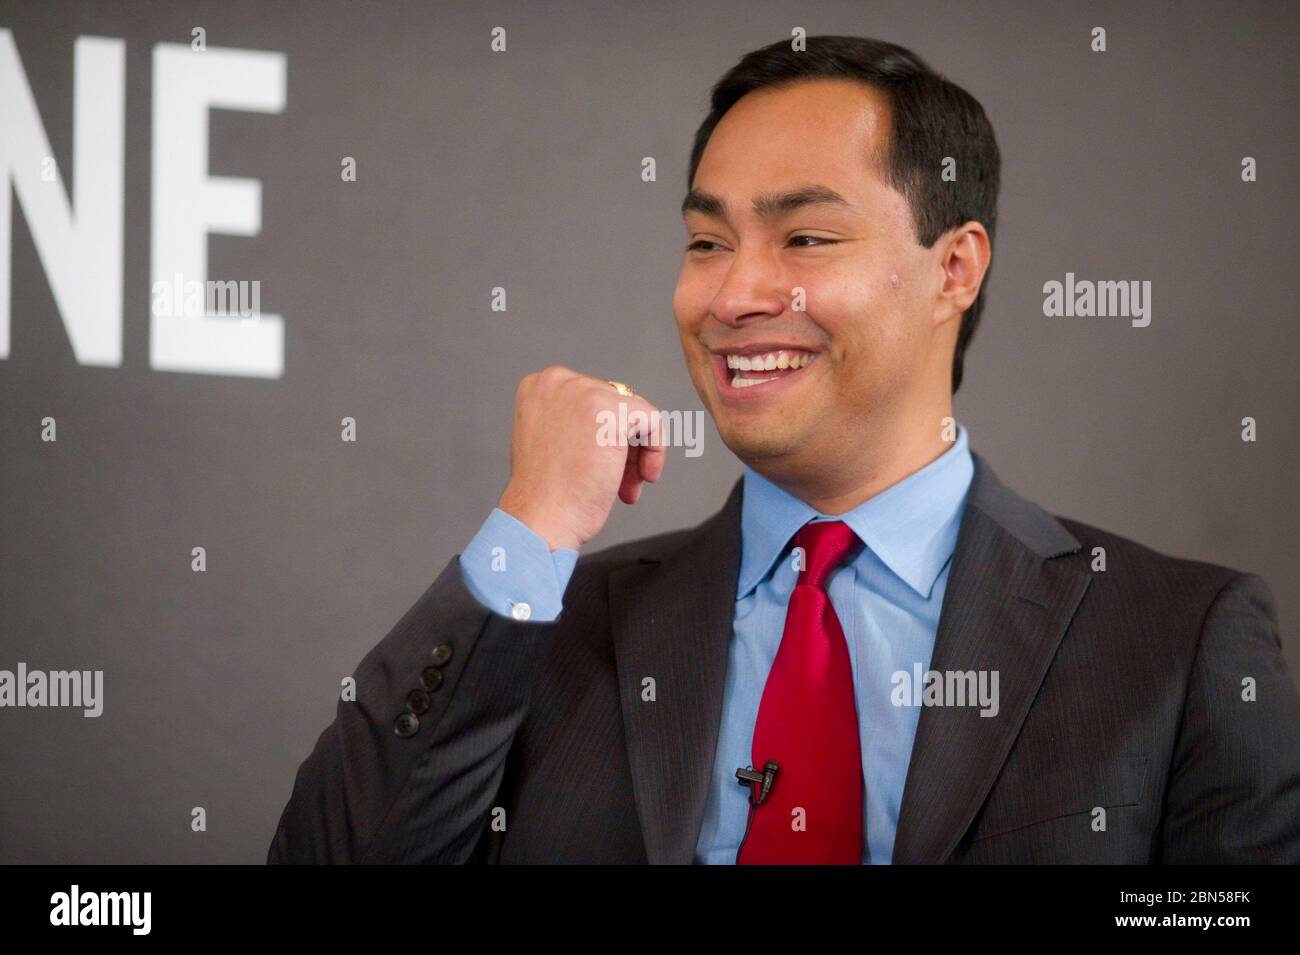 Austin Texas USA, December 1 2011: Hispanic politician Joaquin Castro of San Antonio speaks to Evan Smith at a Texas Tribune event. the Stanford and Harvard educated Castro, 37, has announced his intentions to run for United State Senate in 2012. His twin brother, Julian, is the mayor of San Antonio. ©Bob Daemmrich Stock Photo